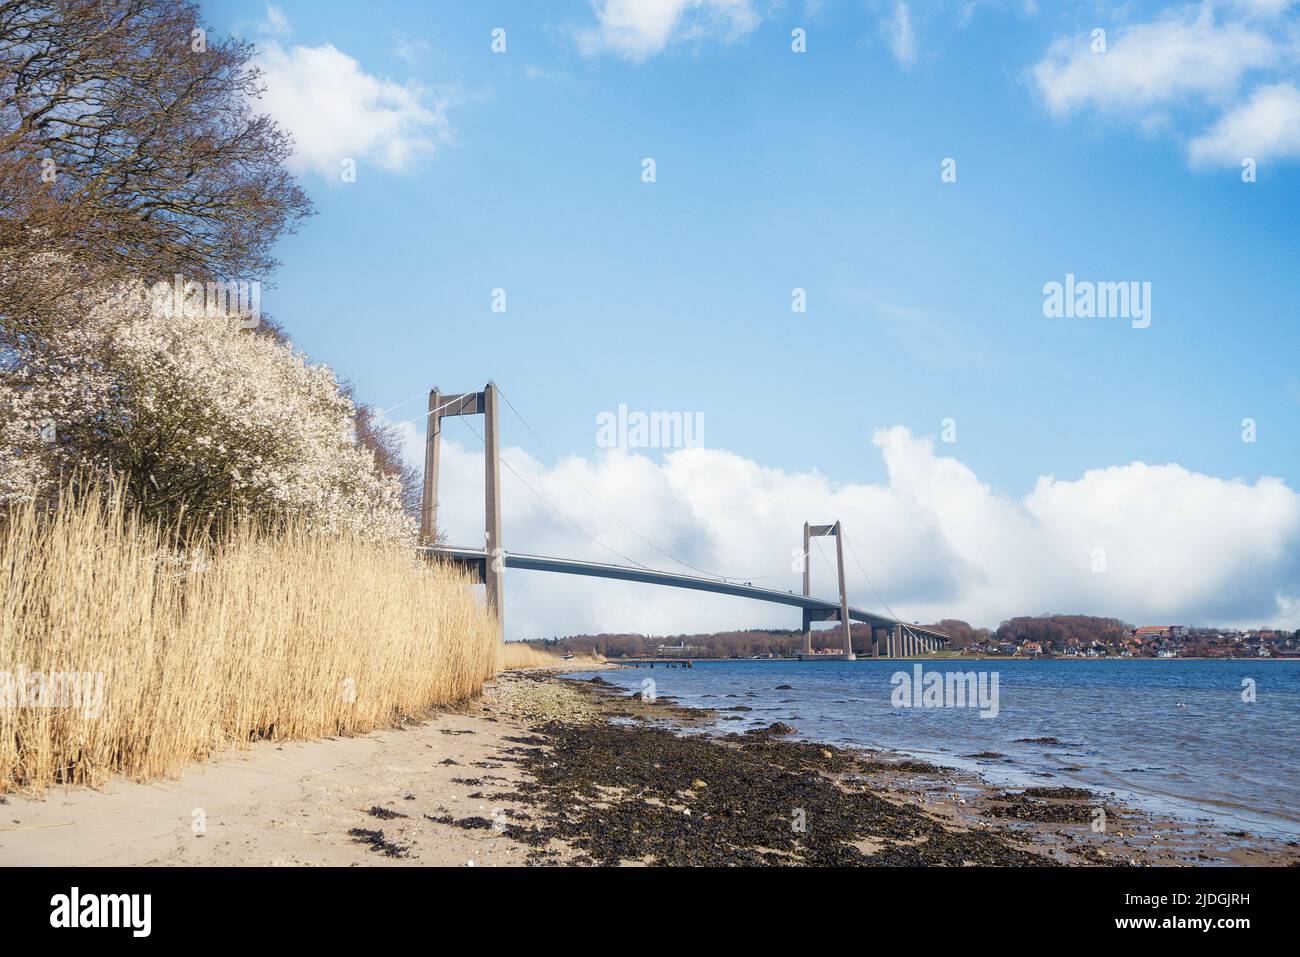 Beautiful bridge over a water passage with a sand beach and rushes along the water Stock Photo